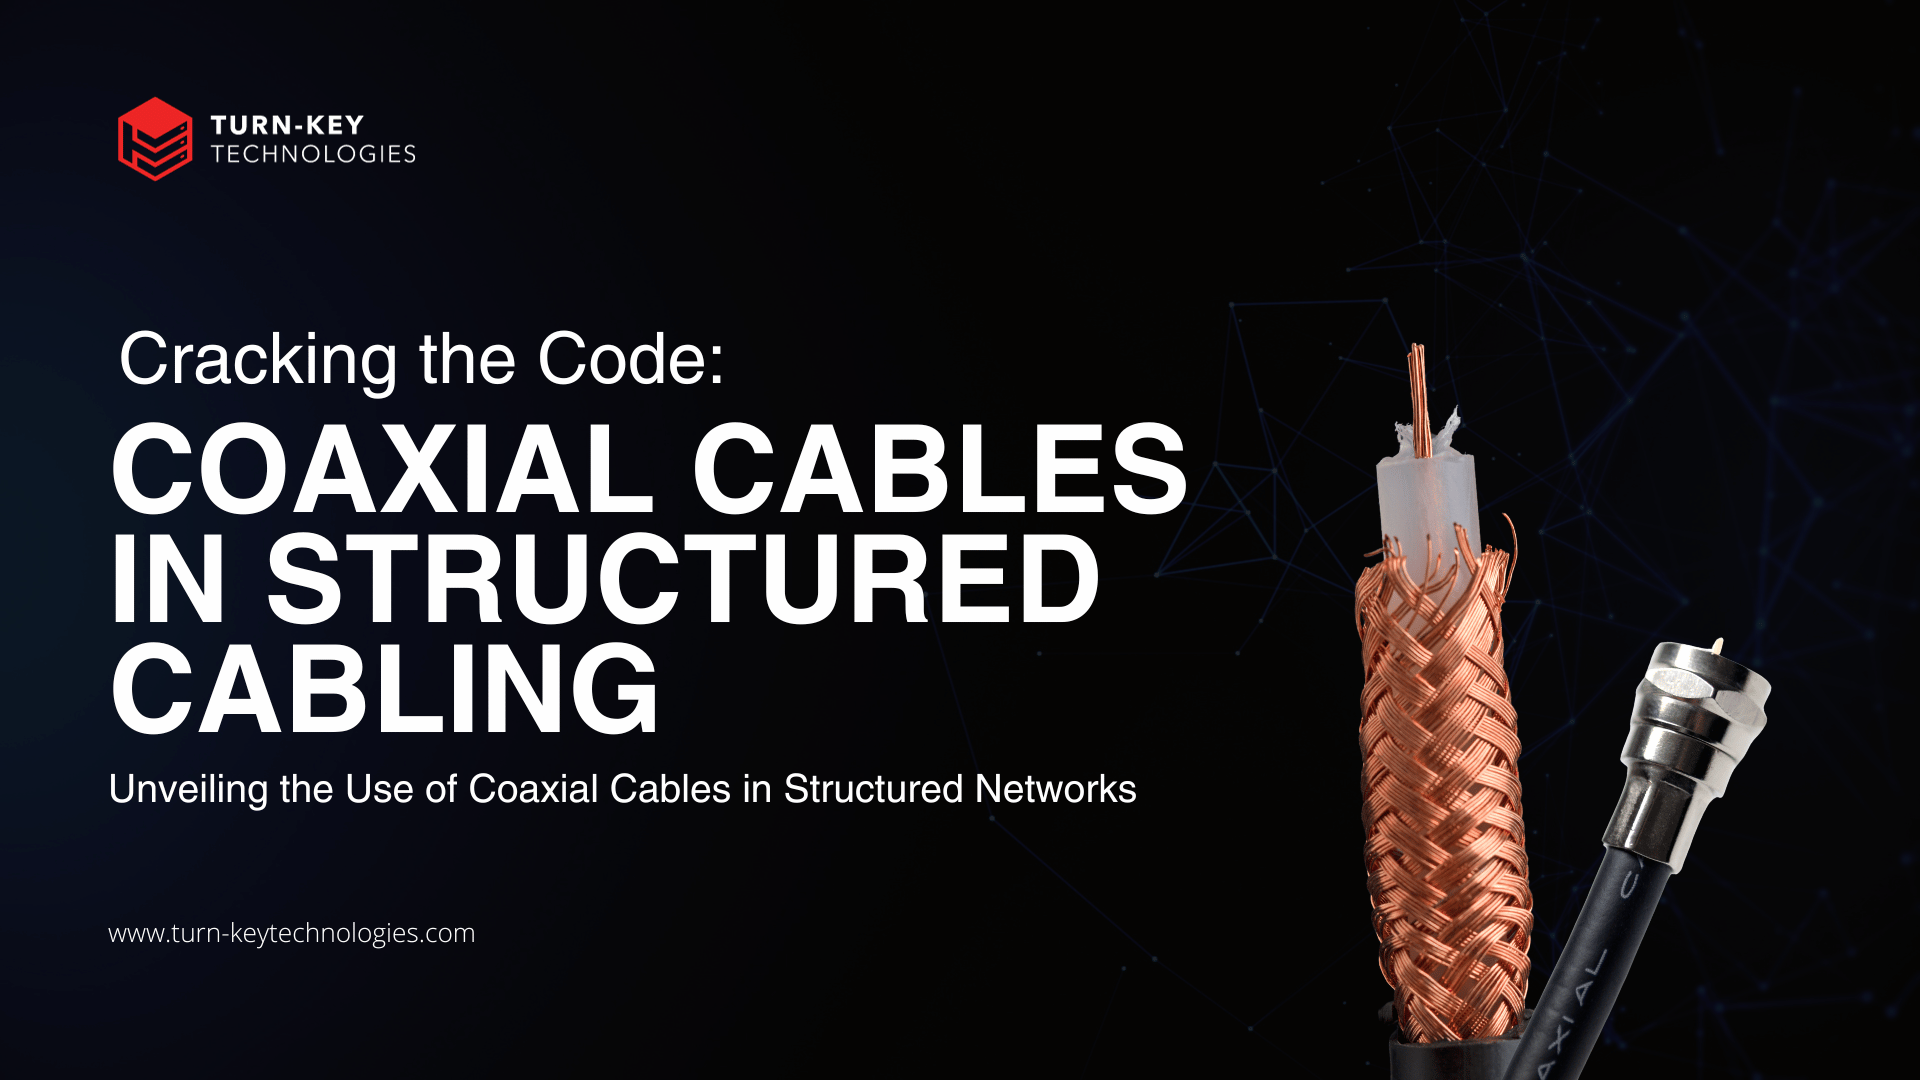 Coaxial cables in structured cabling